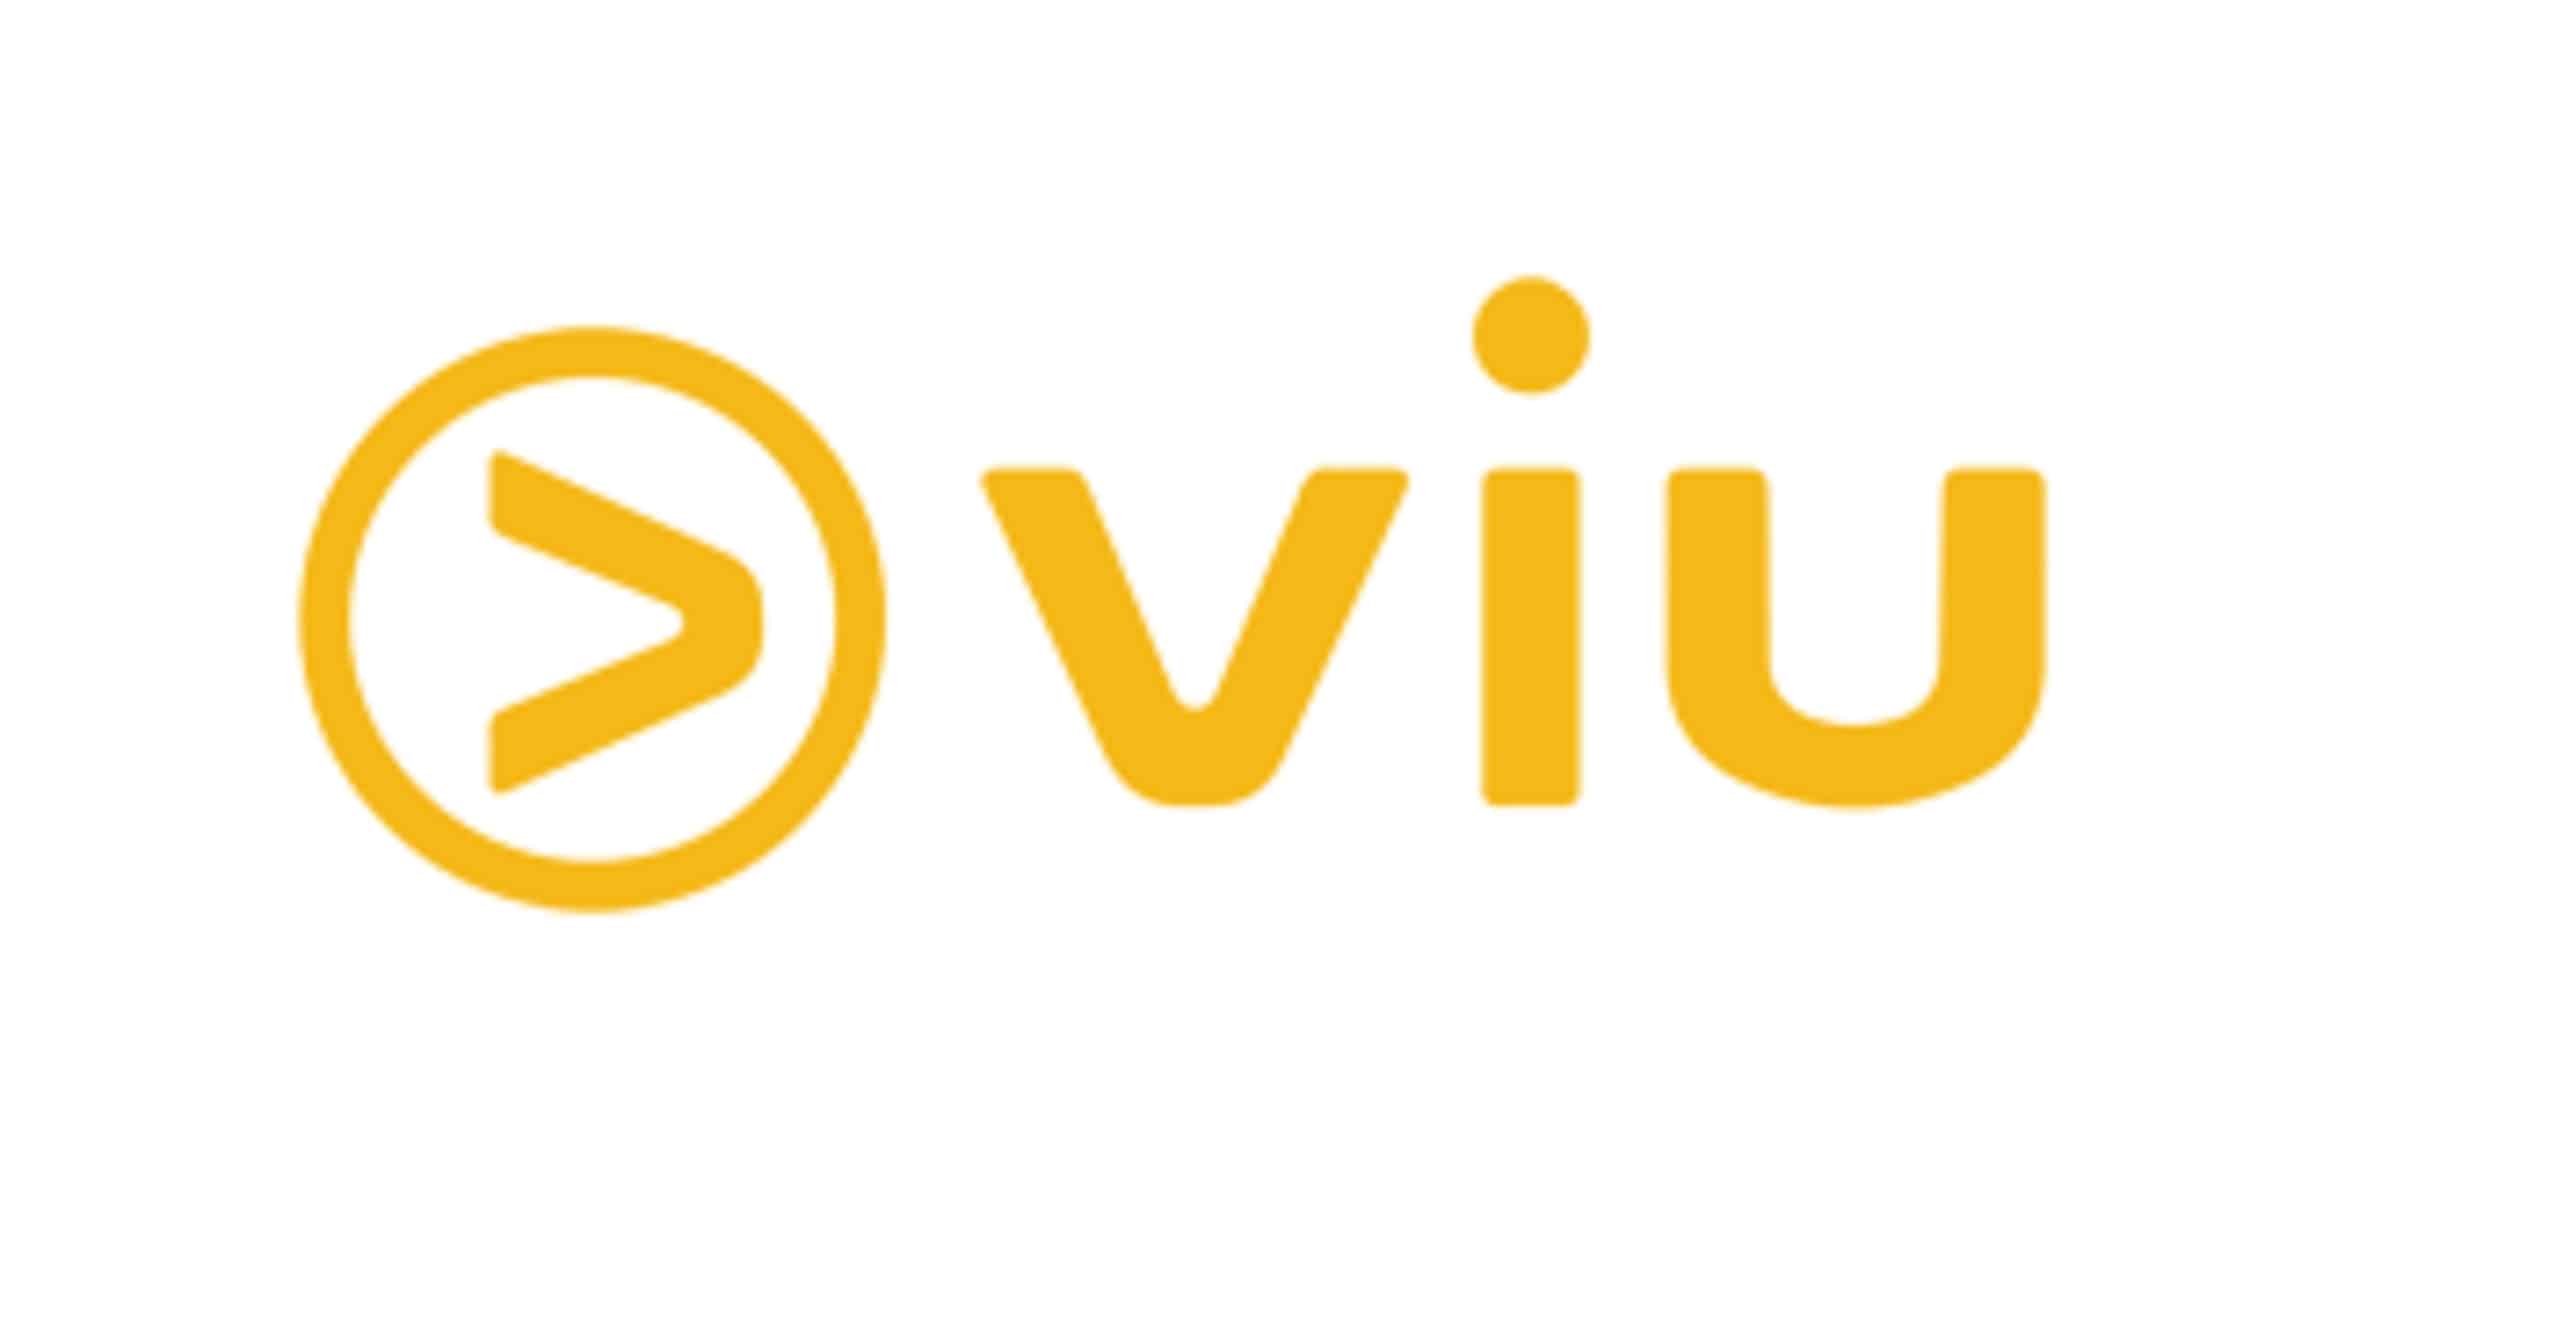 Vuclip Launches New Premium VOD Service Viu in Egypt in Partnership with Orange